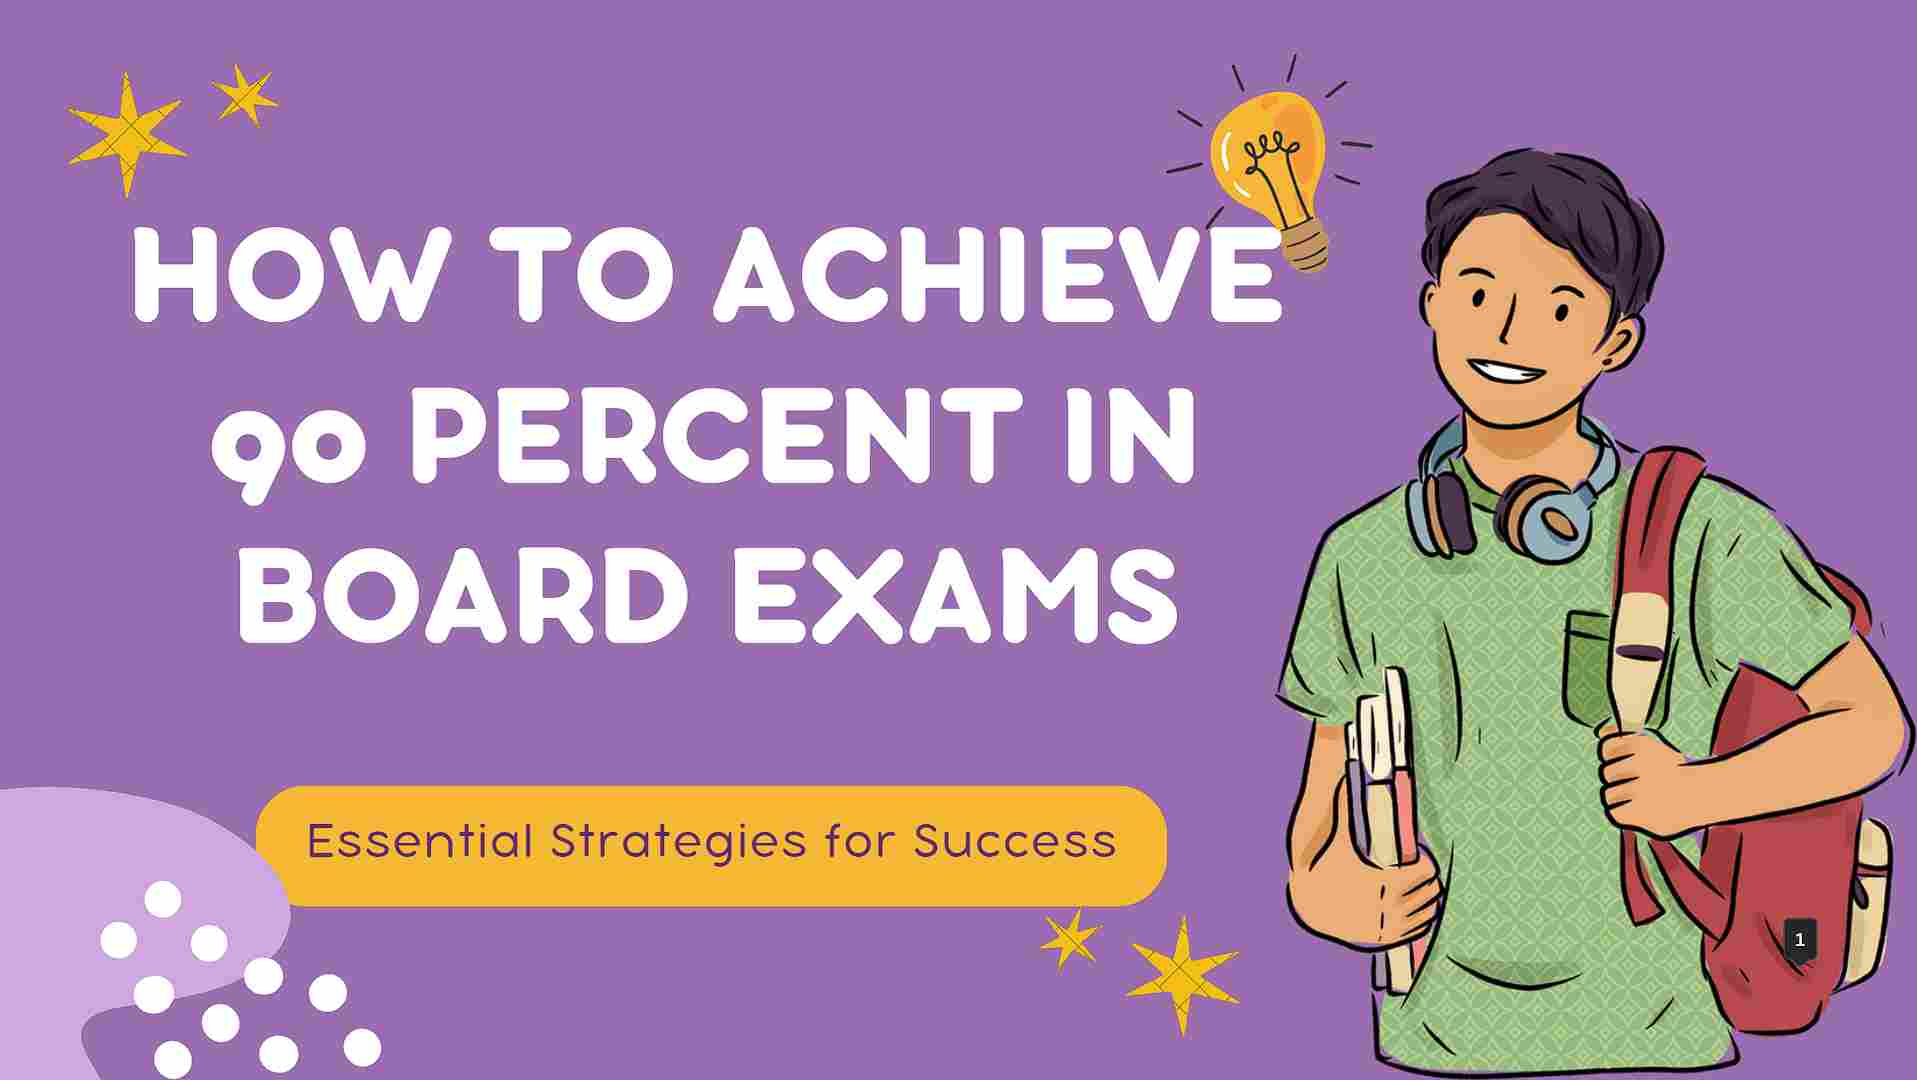 How to Achieve 90 Percent in Board Exams: 10 Proven Strategies